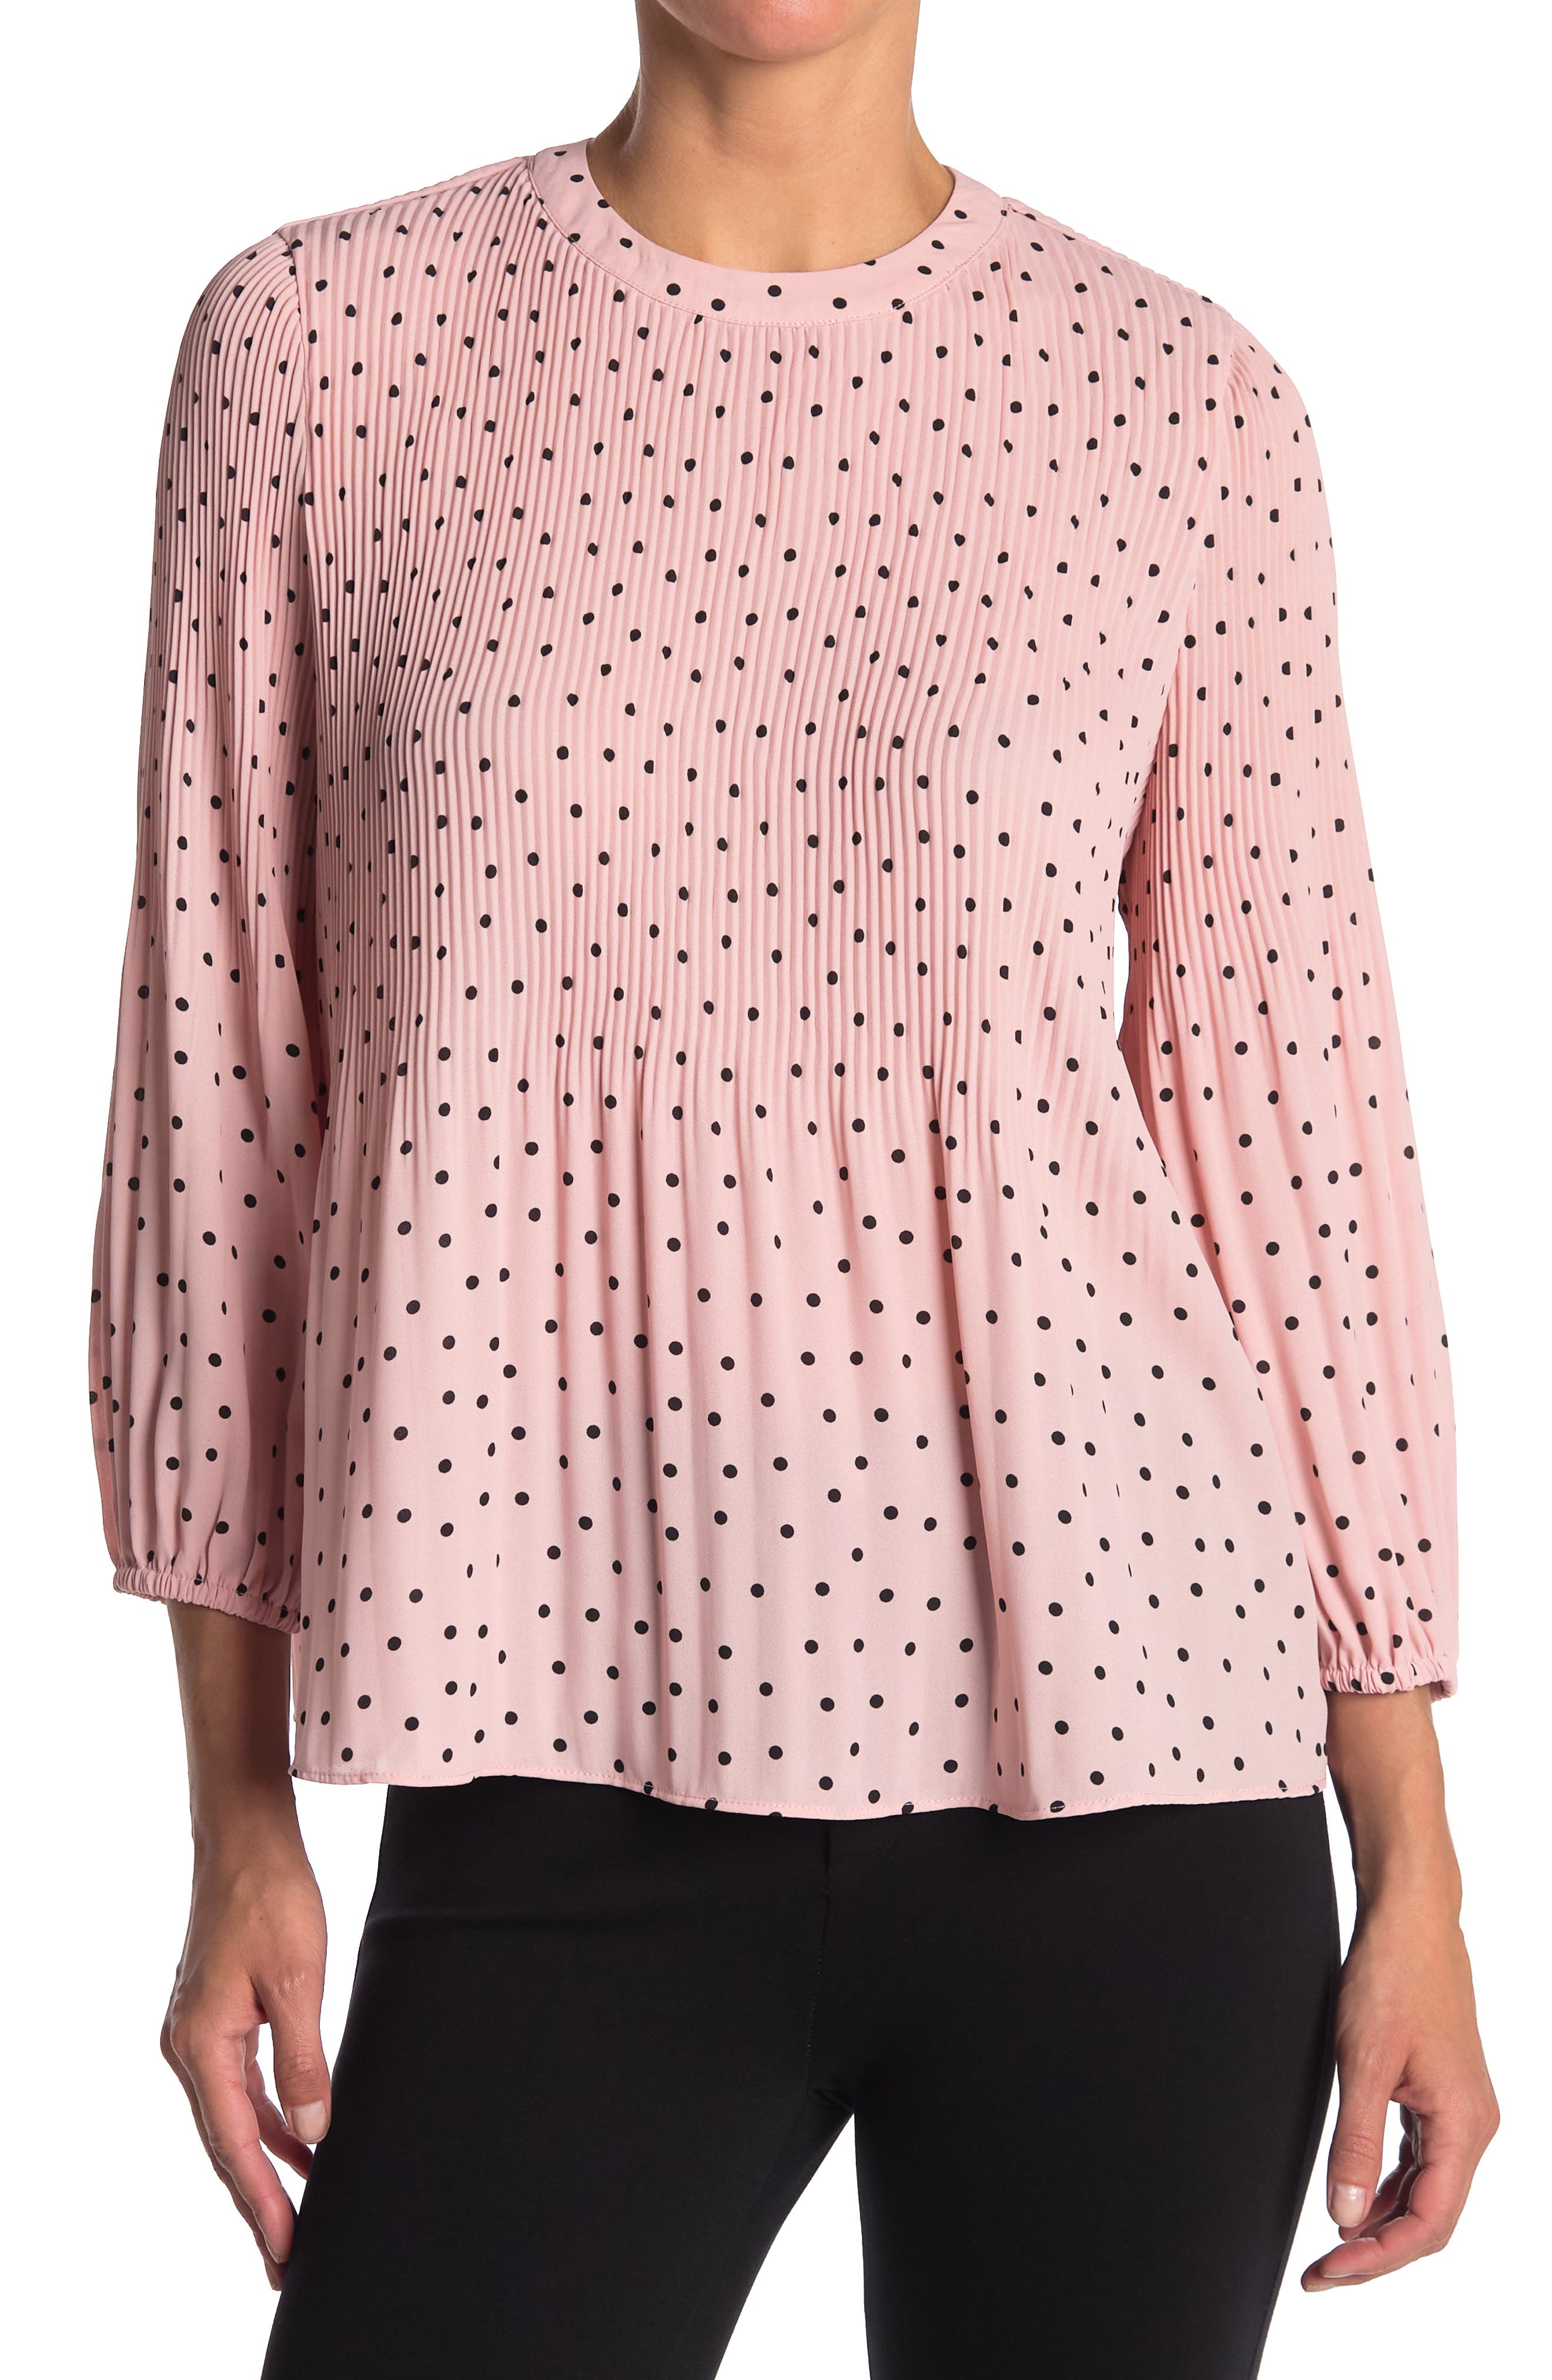 ADRIANNA PAPELL GEORGETTE PLEATED POLKA DOT BLOUSE,886732530370